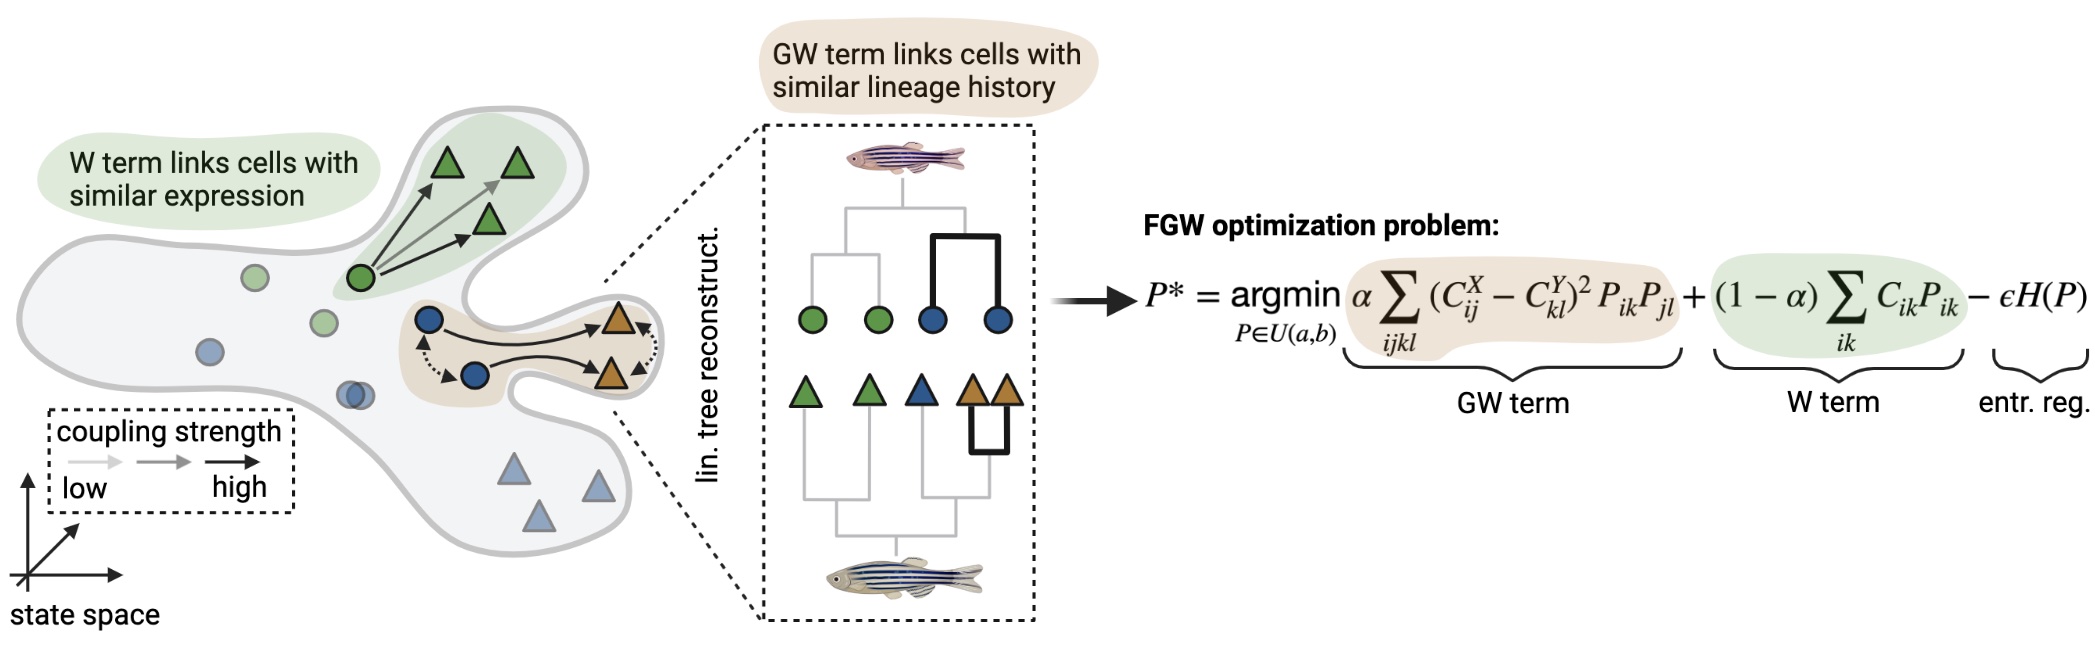 moslin combines gene expression with lineage information in a Fused Gromov-Wasserstein objective function.